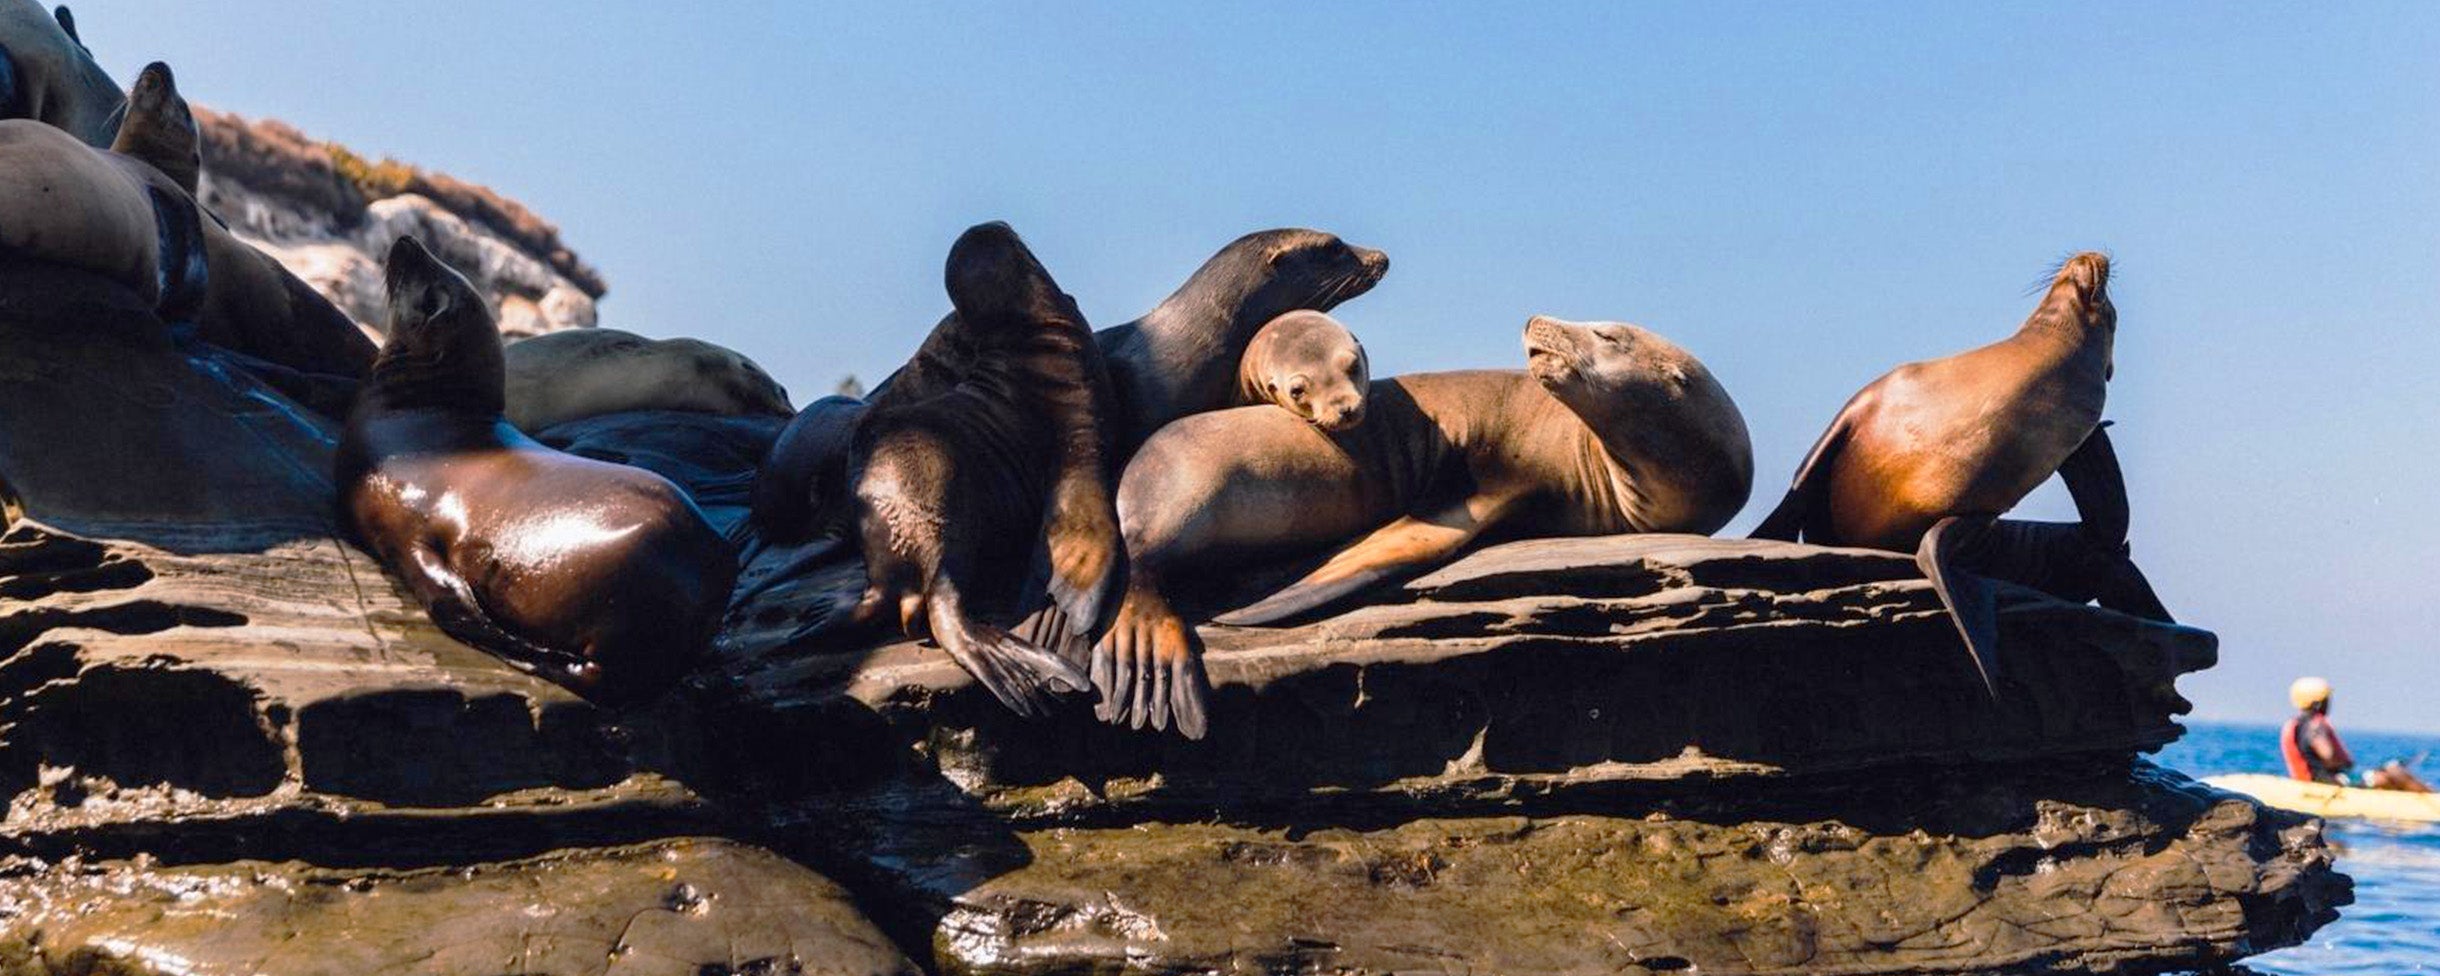 Sea lions in La Jolla, California sunbathing at the clam during a kayak and snorkel tour